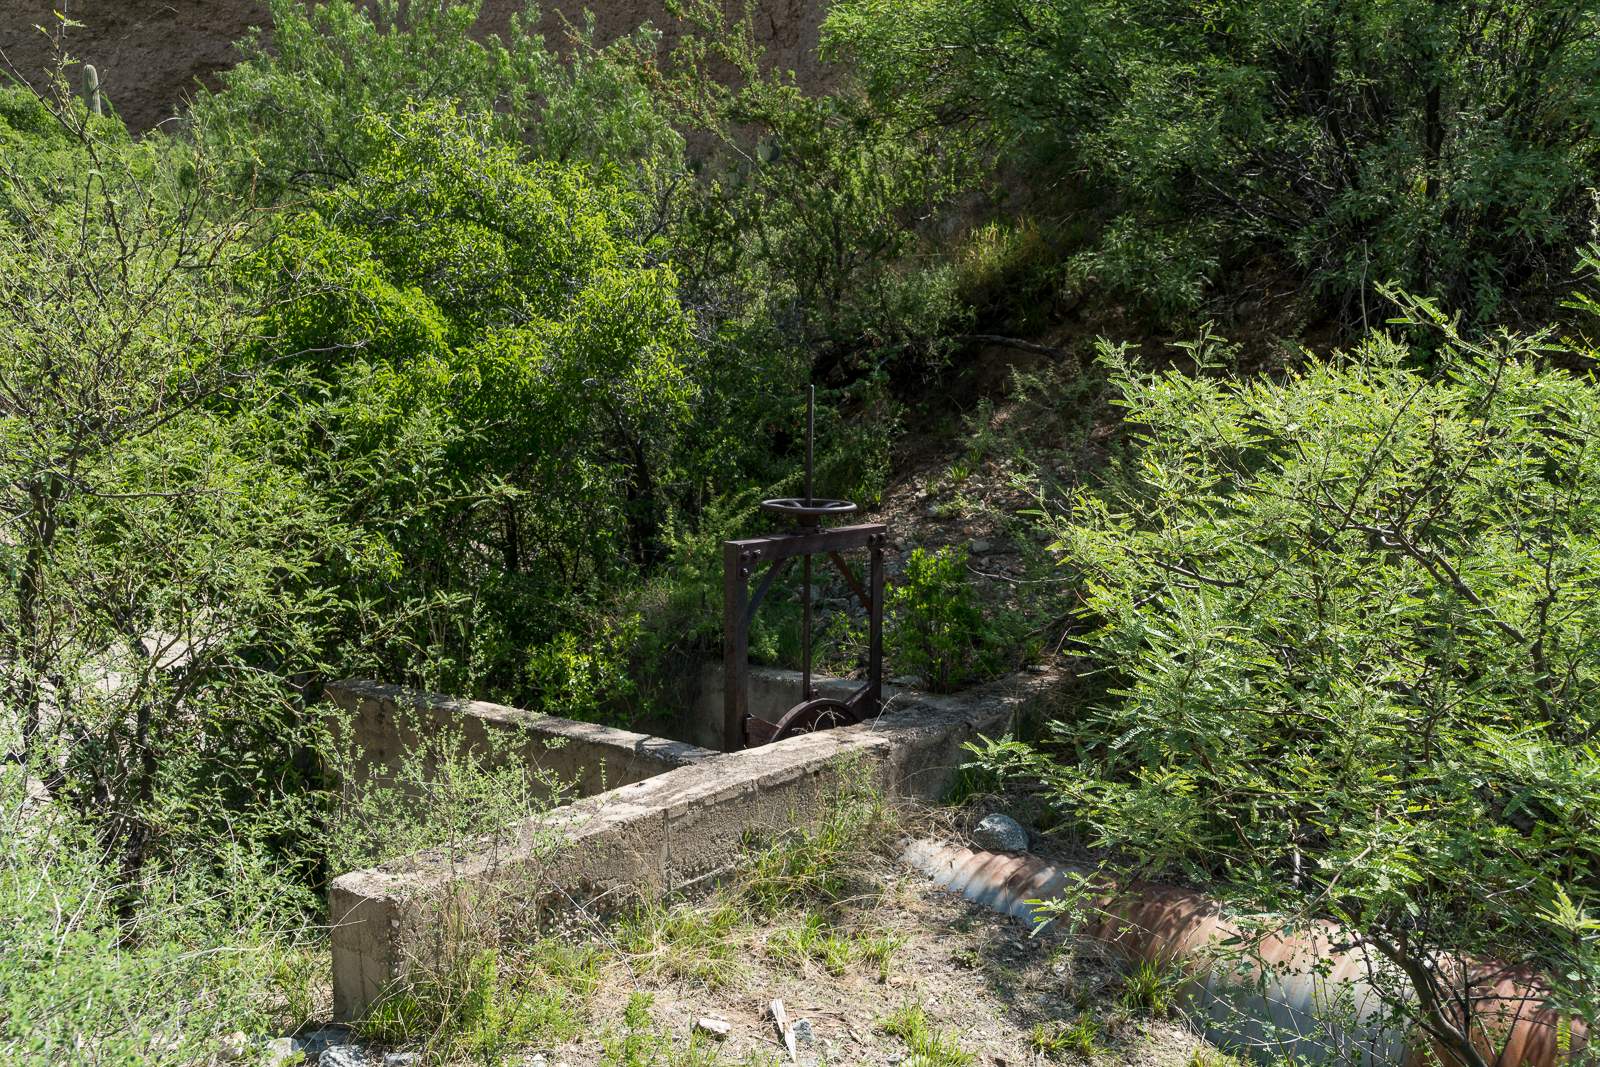 Water works near the Ventana Windmill in a small side canyon. July 2016.